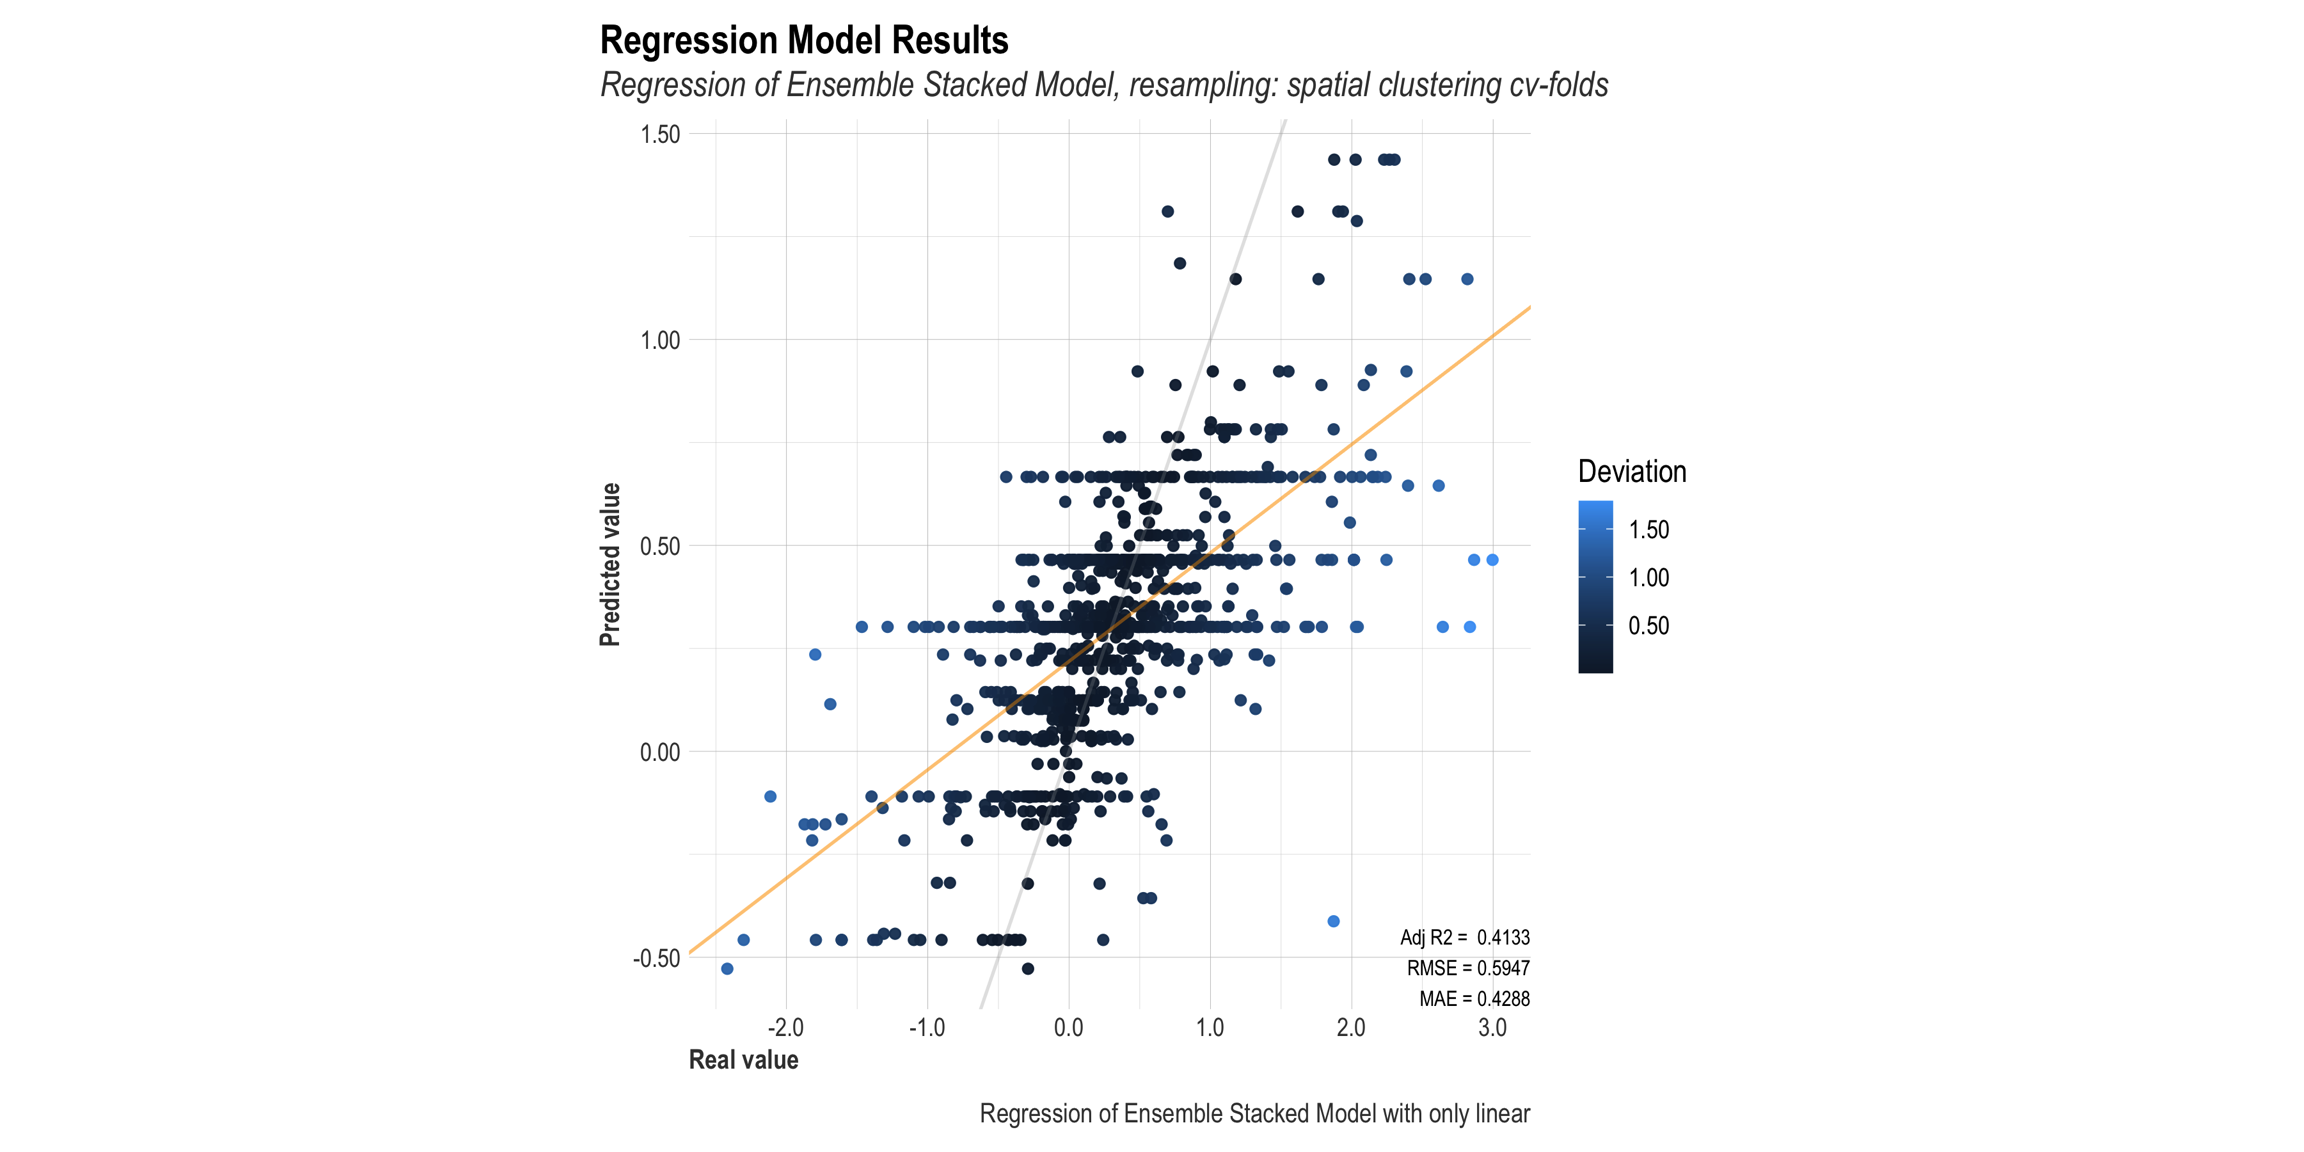 Lares linear regression plot for the ensemble stacked model with spatial clustering cv-folds